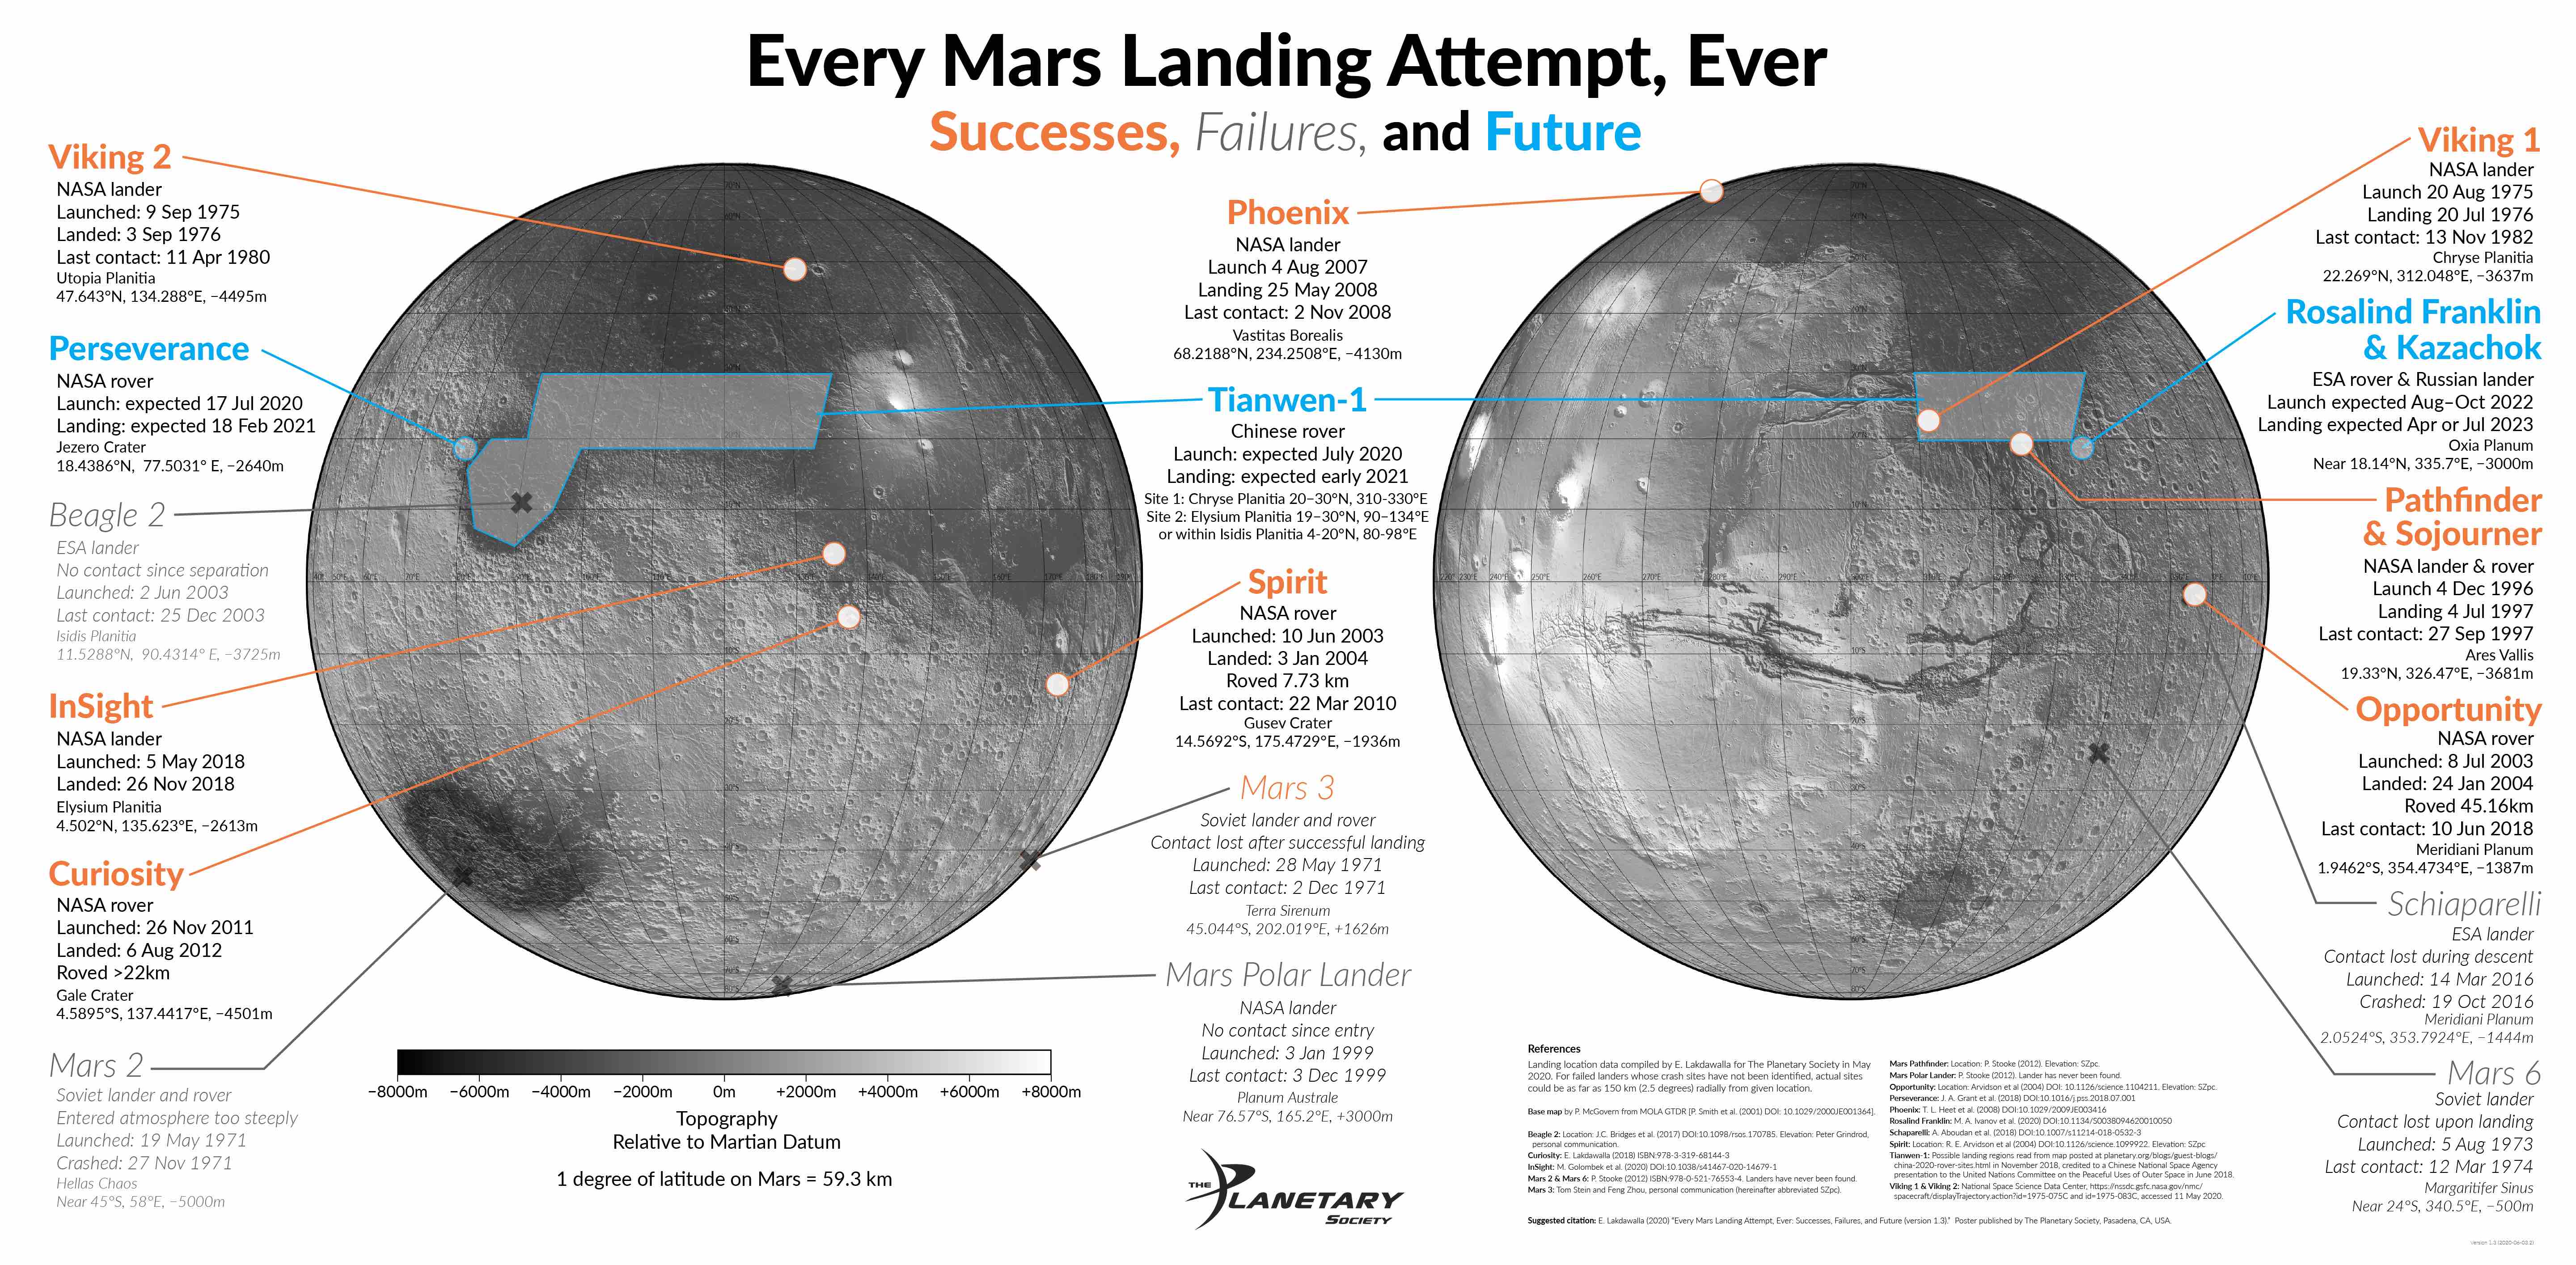 Every Mars Landing Attempt map infographic